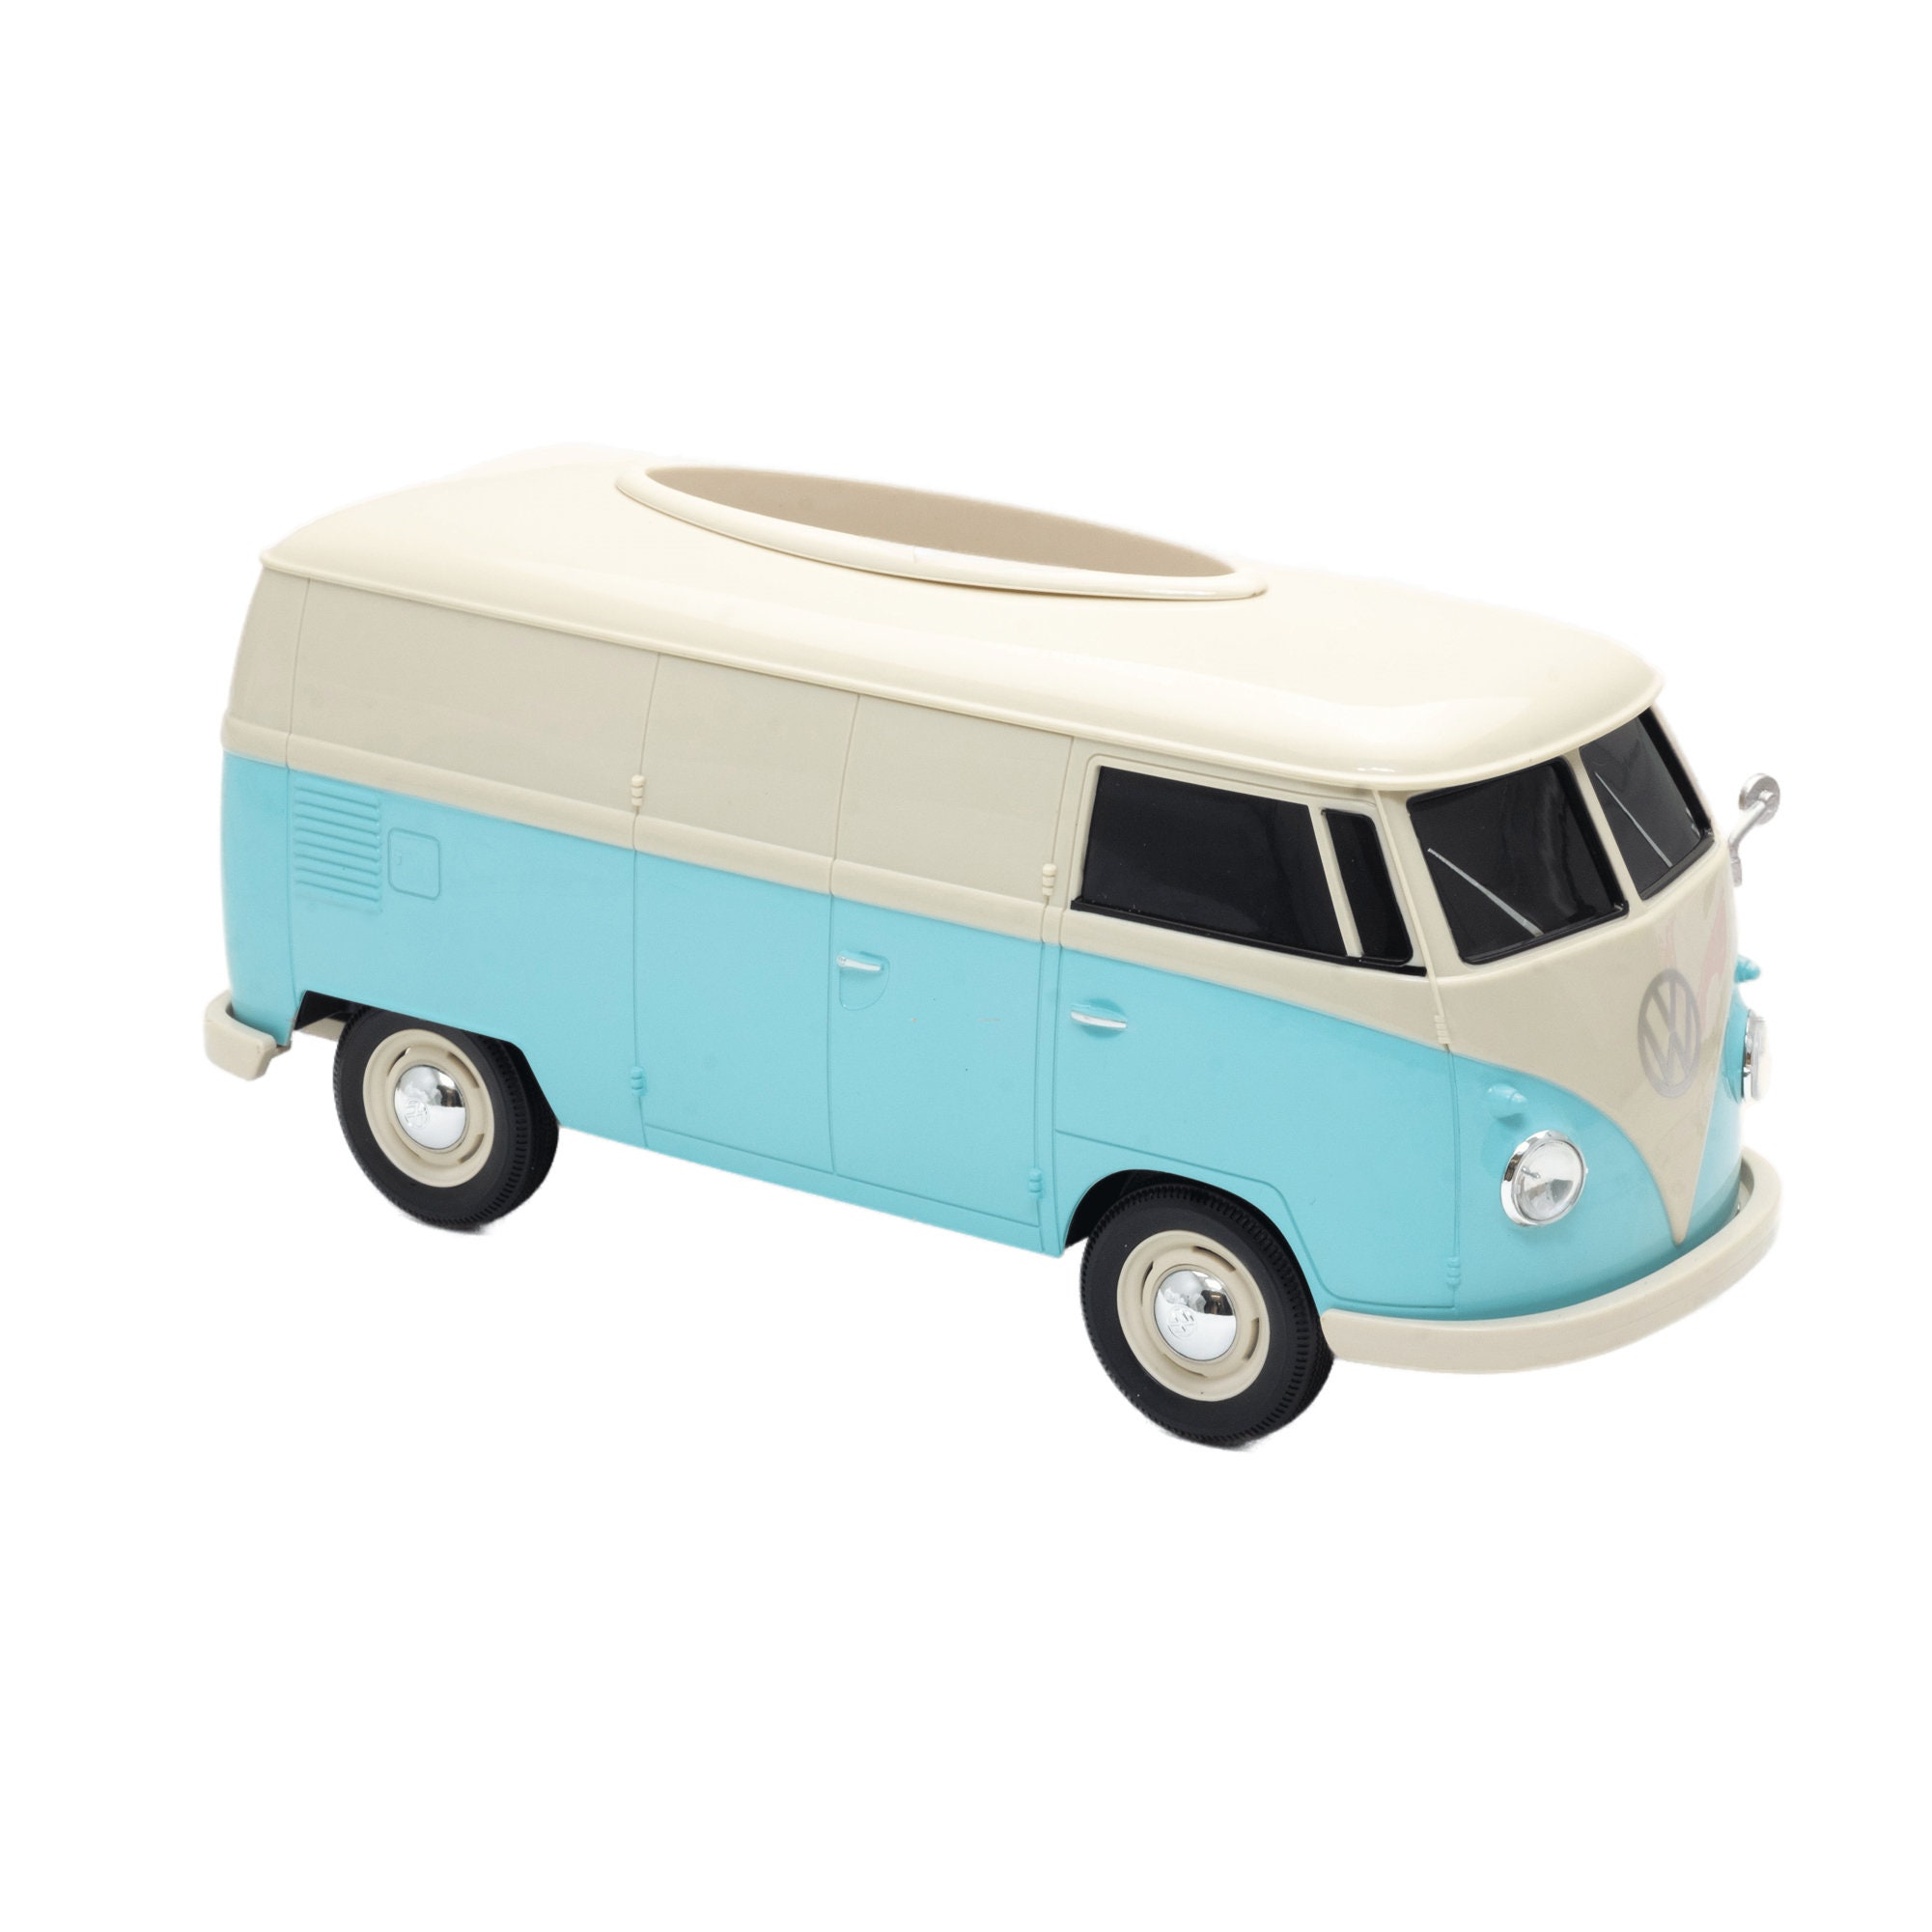 Limited Edition Official Licensed T1 Bus 1963 Multi-functional Boxtissue Box/phone  Holder/remote Holder, 2 Tones Edition blue/cream 